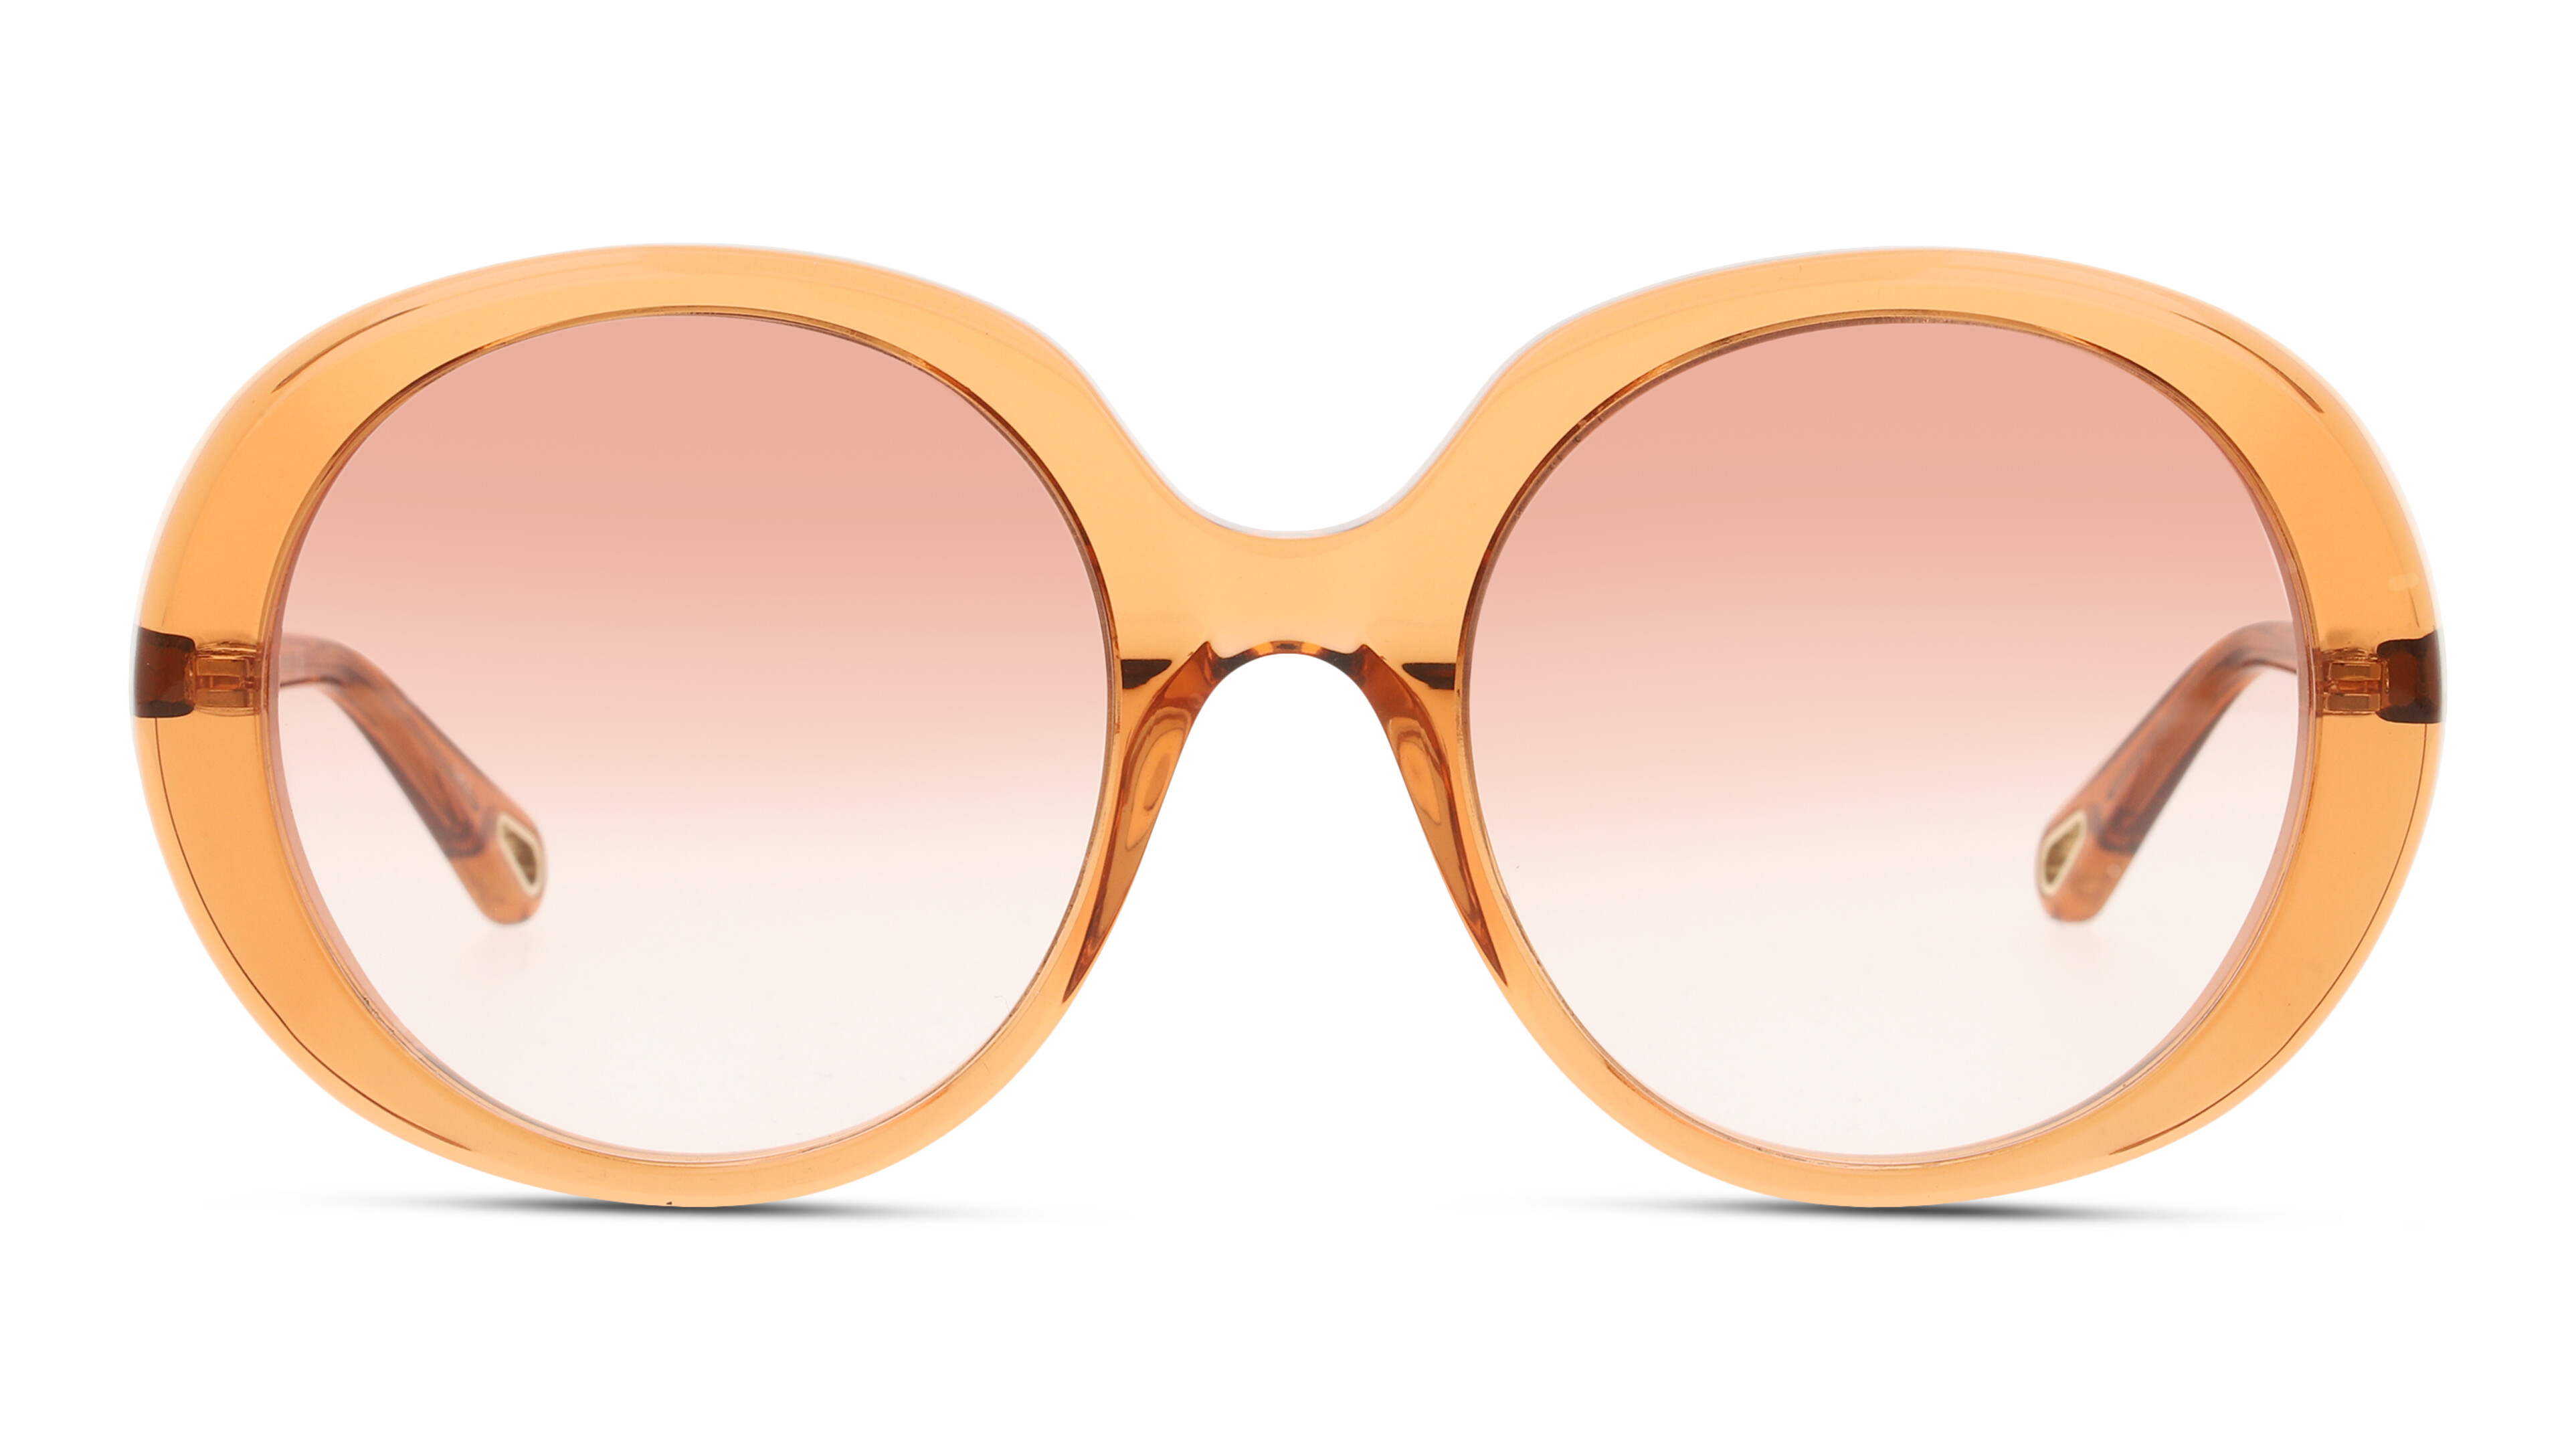 [products.image.front] Chloe CH0007S 001 Sonnenbrille